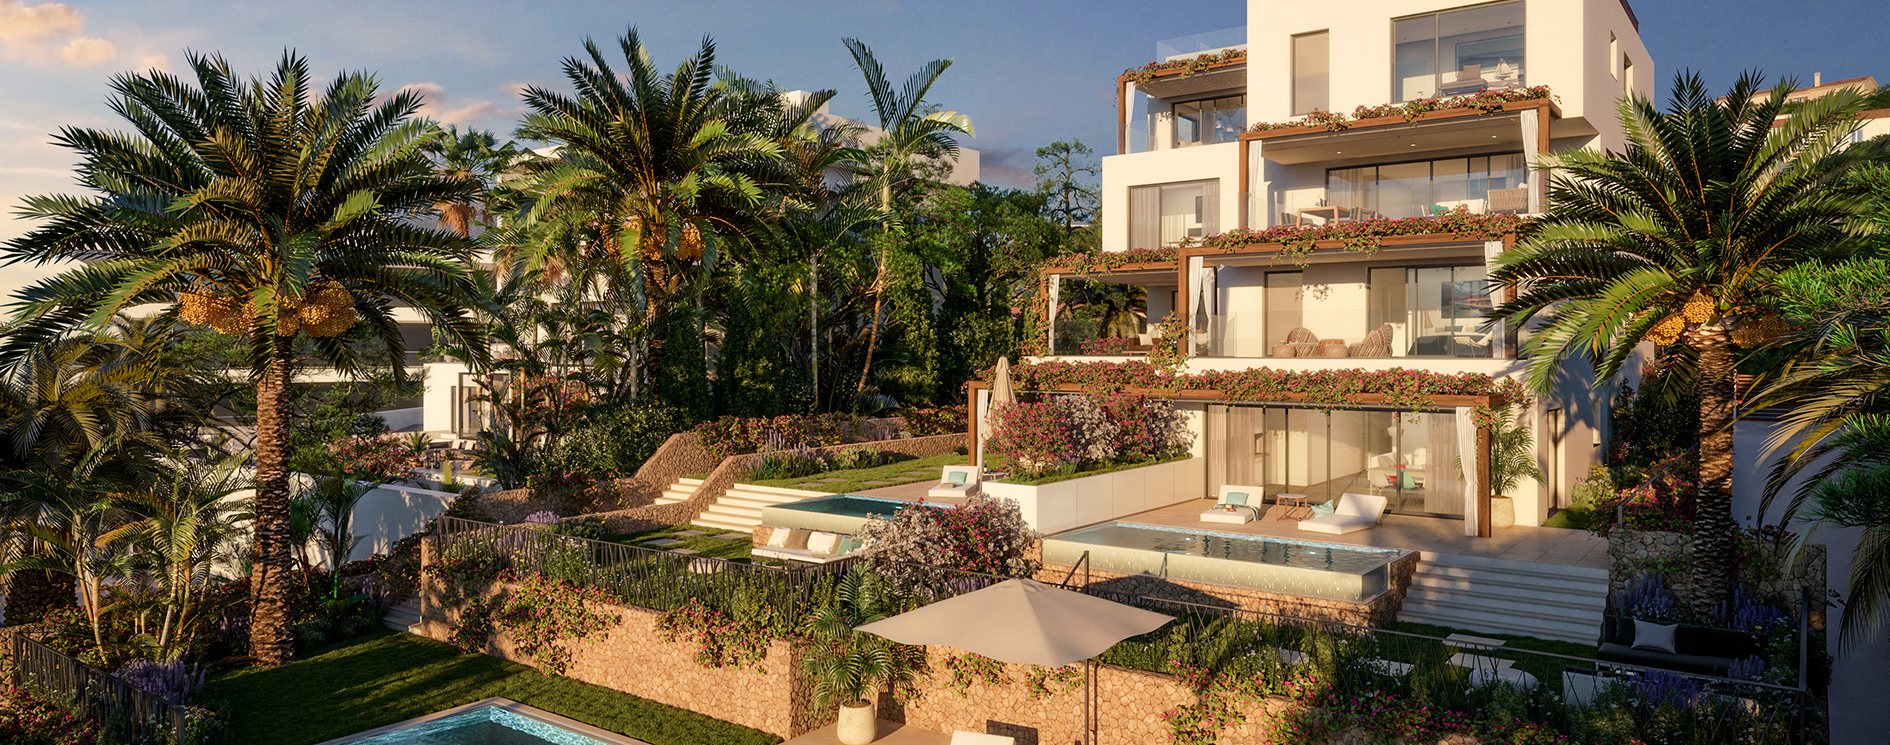 With “ROOF by ELEMENTS”, Domus Vivendi is creating another exclusive apartment complex on Majorca